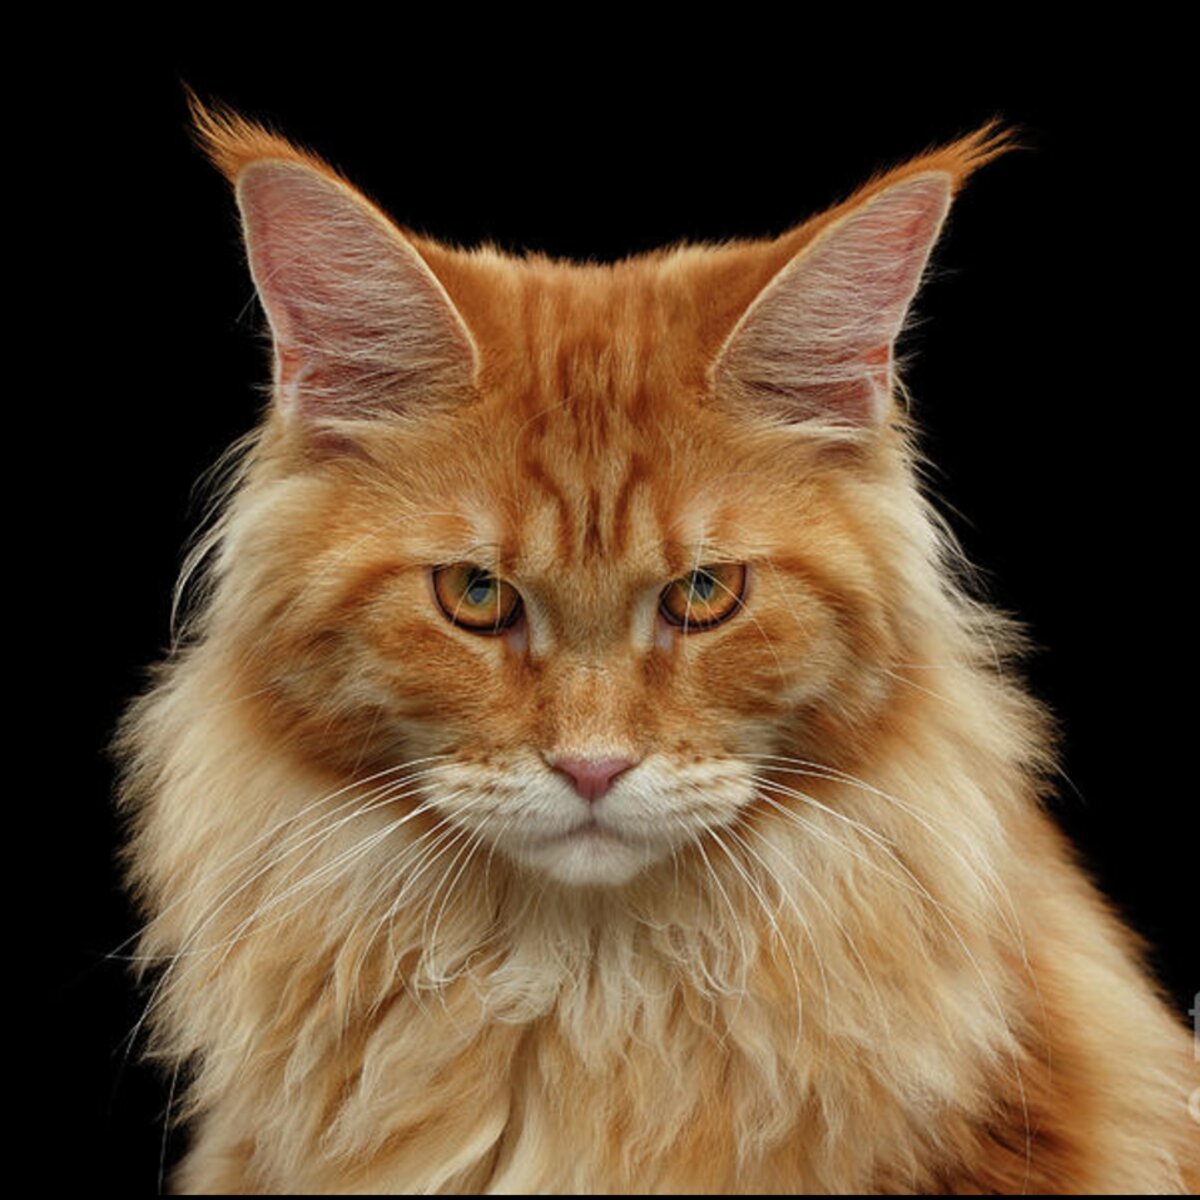 Angry Ginger Maine Coon Cat Gazing on Black background Throw Pillow for ...